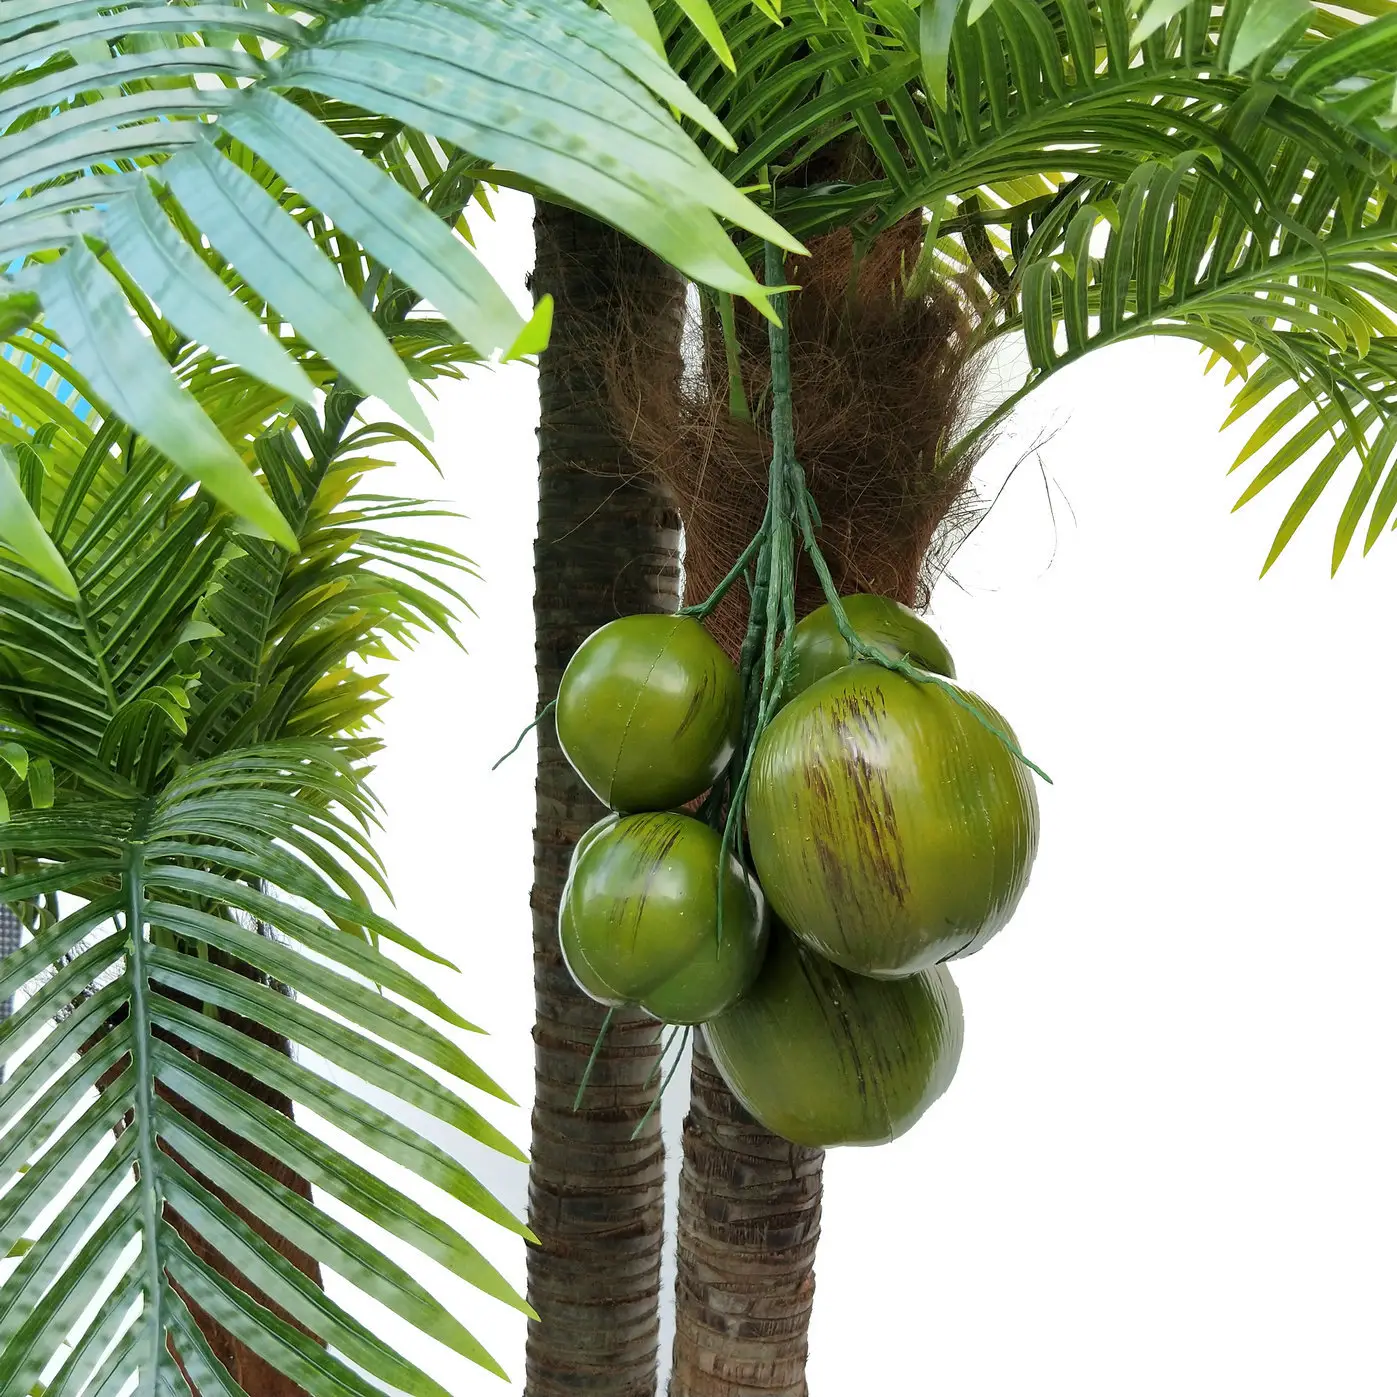 Artificial Coconut Fruit Green Coconuts Plastic Plant On Sale For Coconut Date Palm Tree Decor